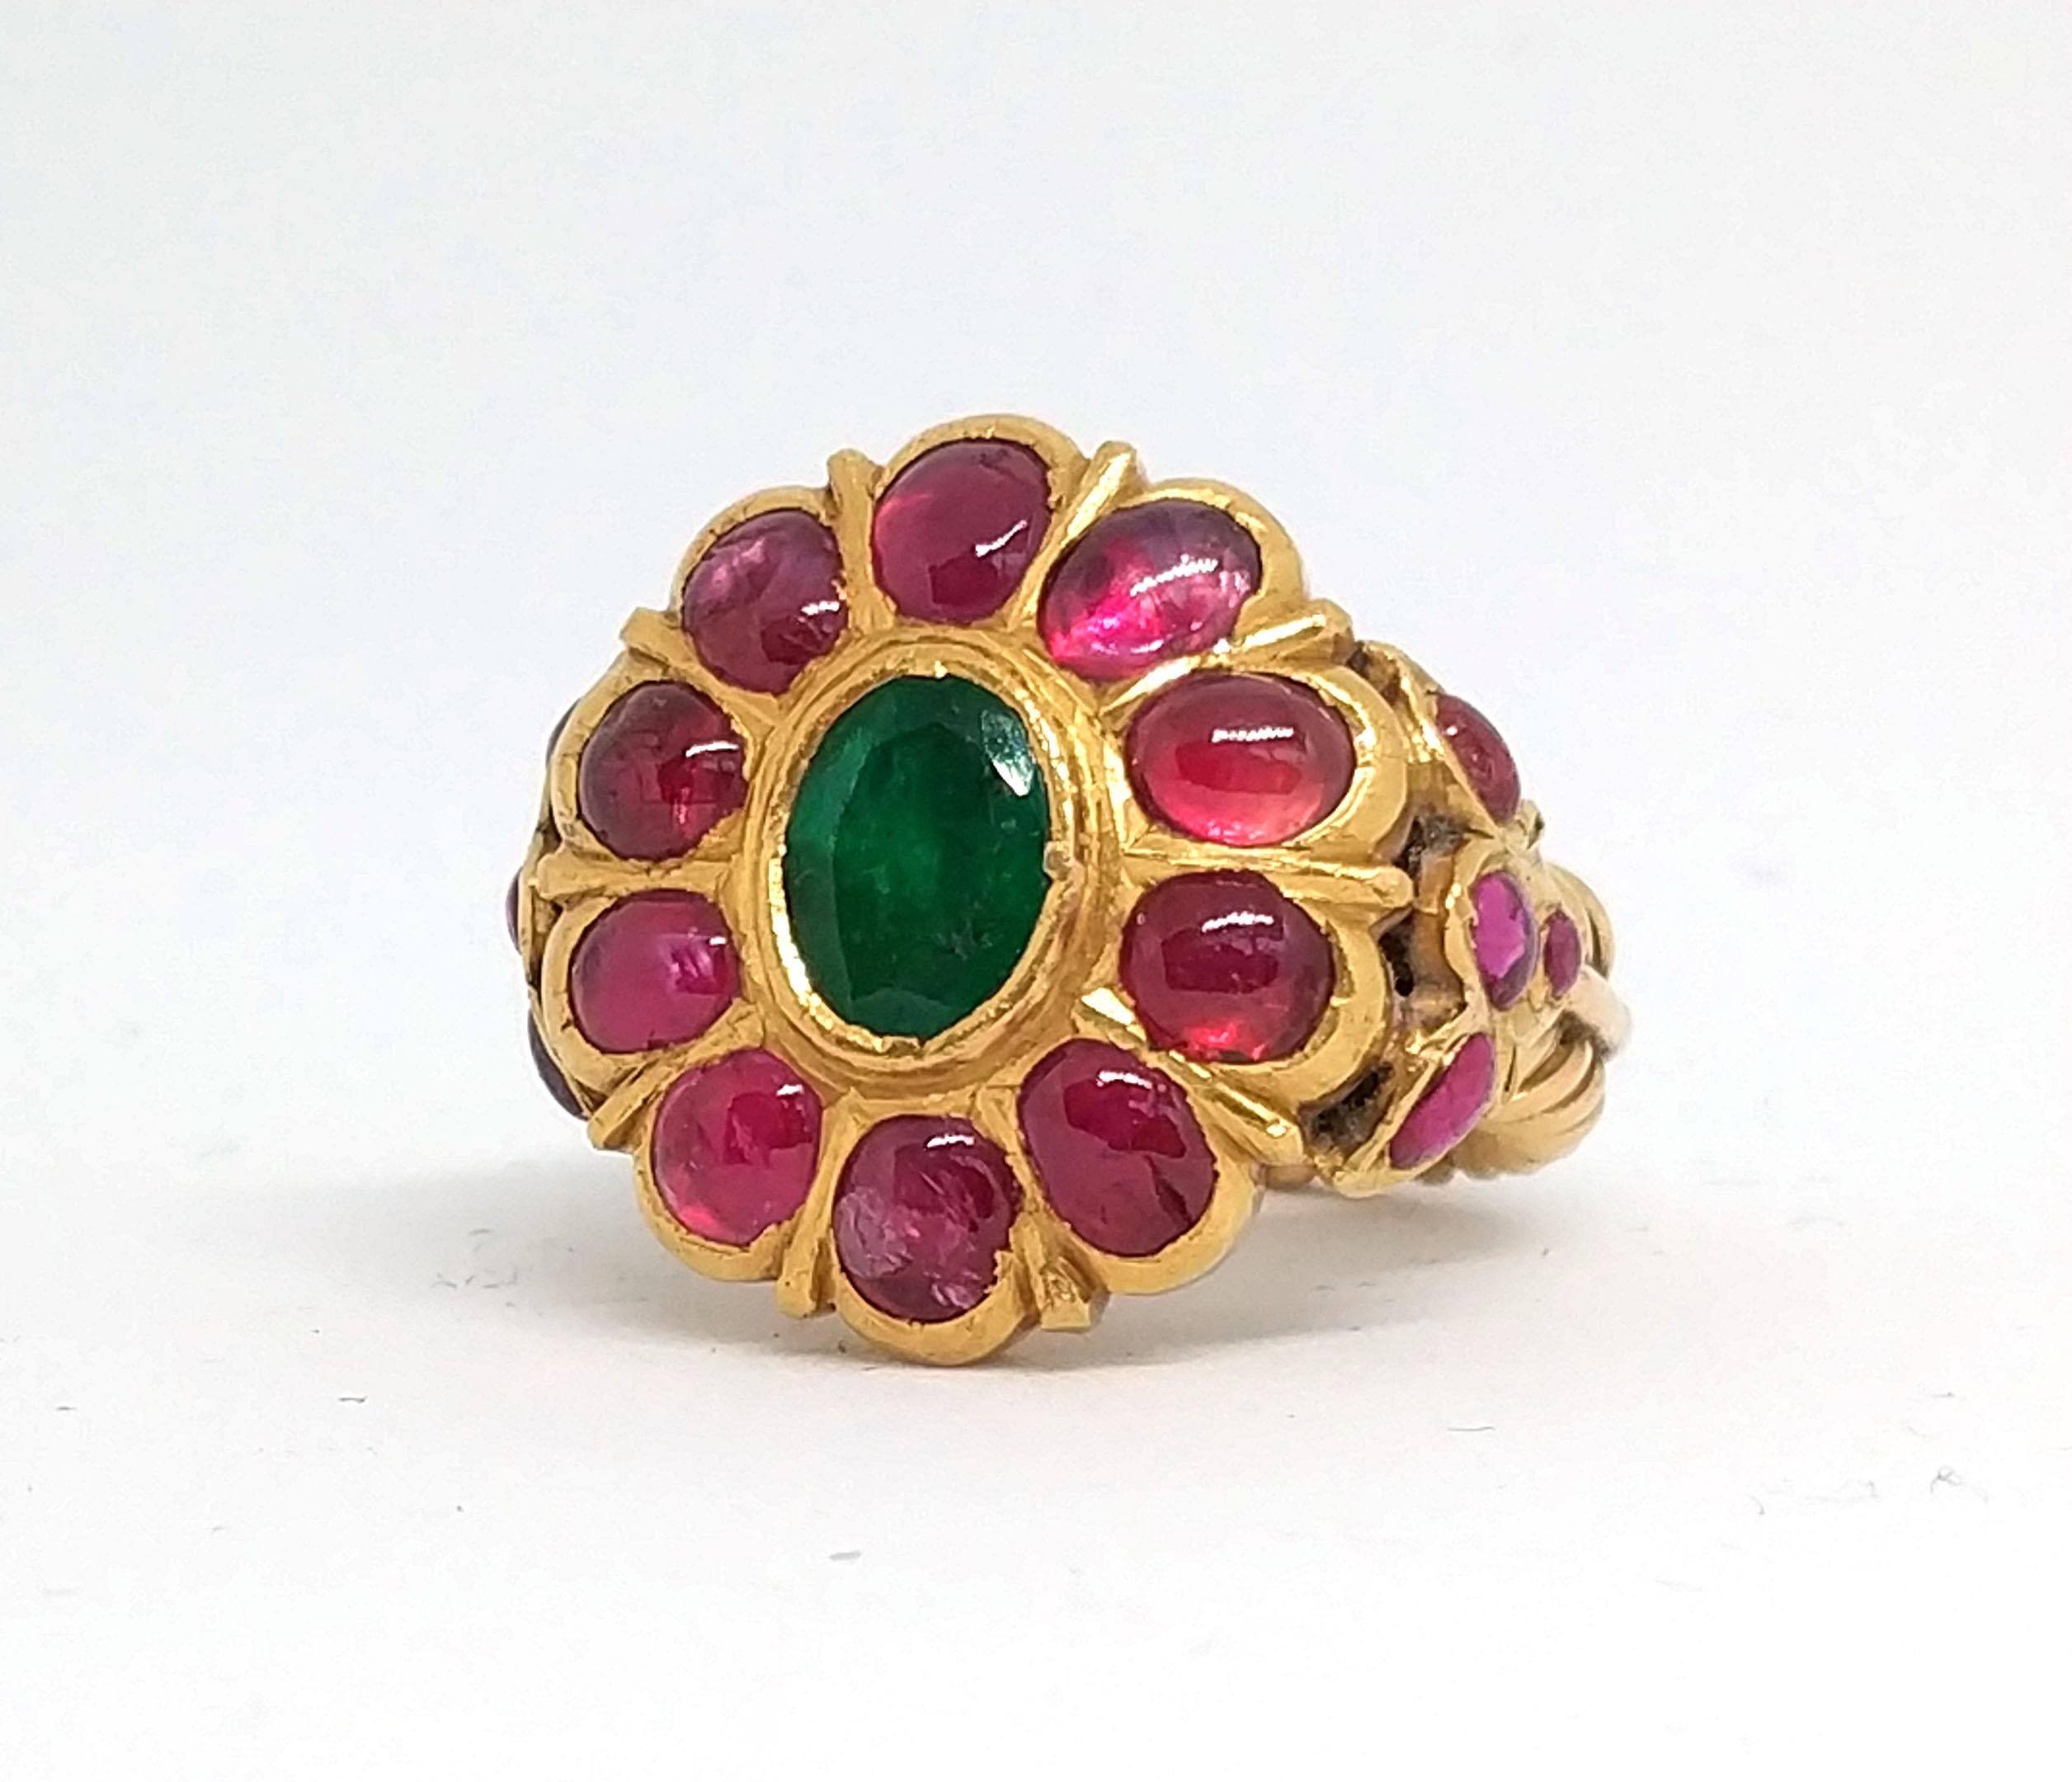 Antique Royal 5.5 carat Ruby and 3 carat Emerald Ring in 23 Carat Gold For Sale 8